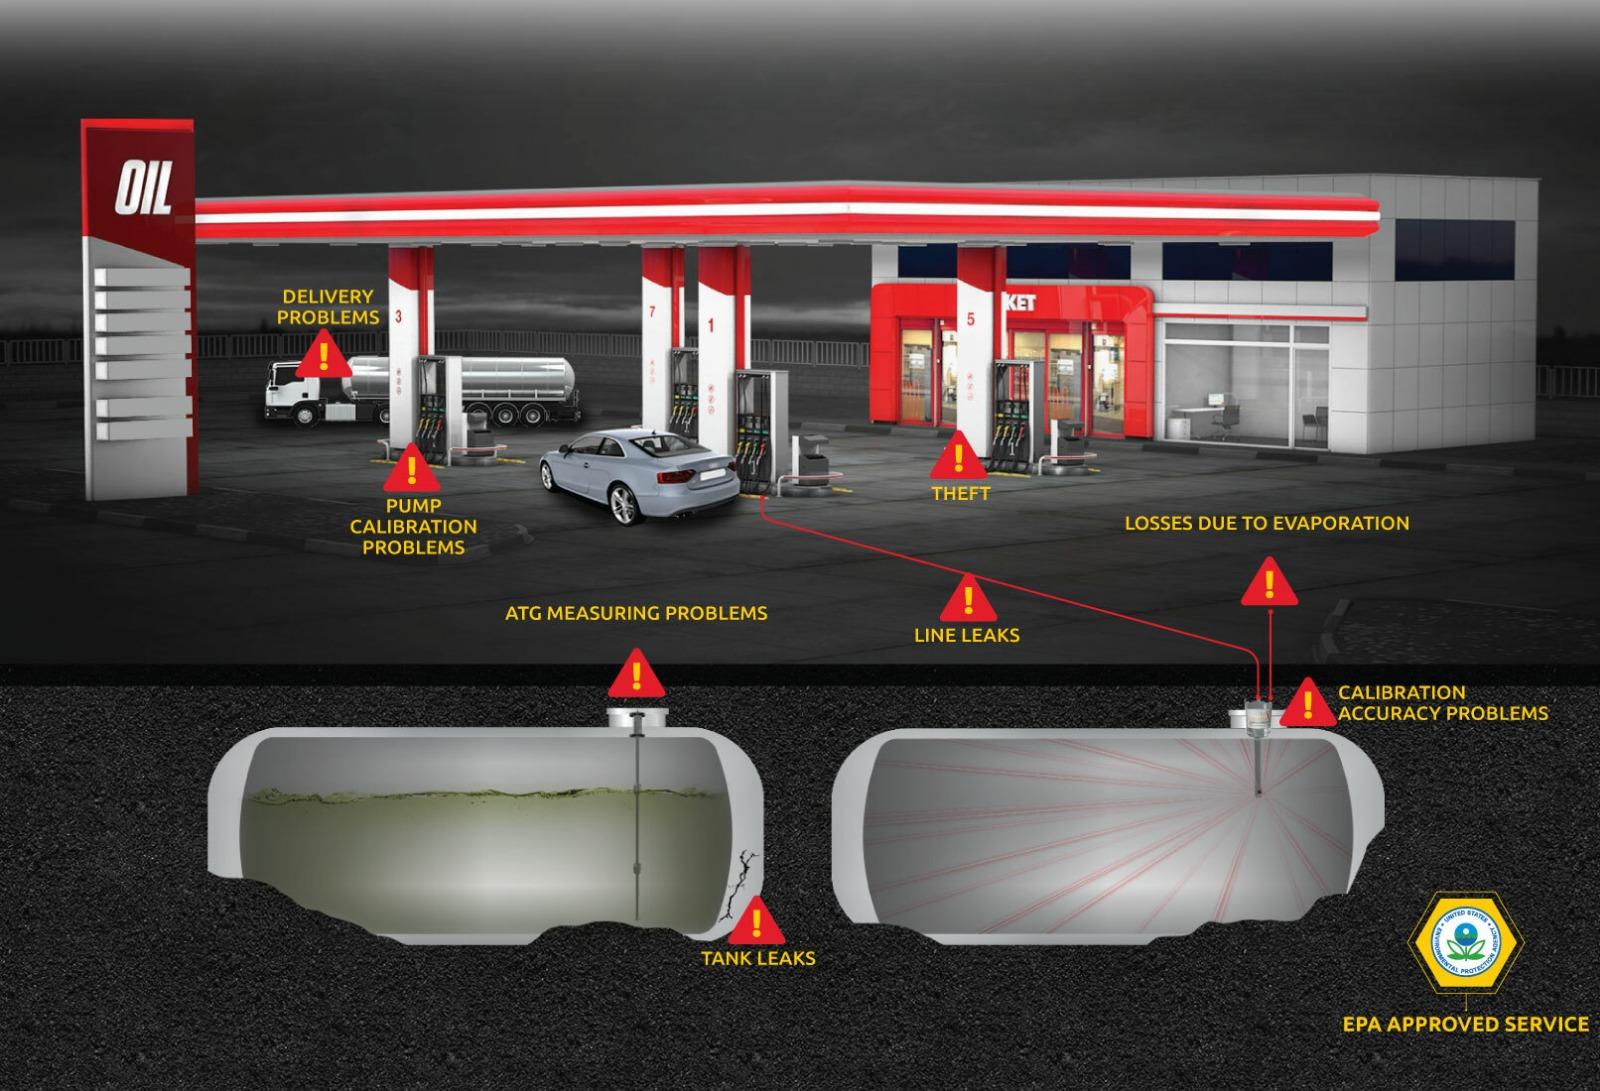 PREVENTING LOSS AND LEAKAGE AT GAS STATIONS | FOX SIR (Statistical Inventory Management)